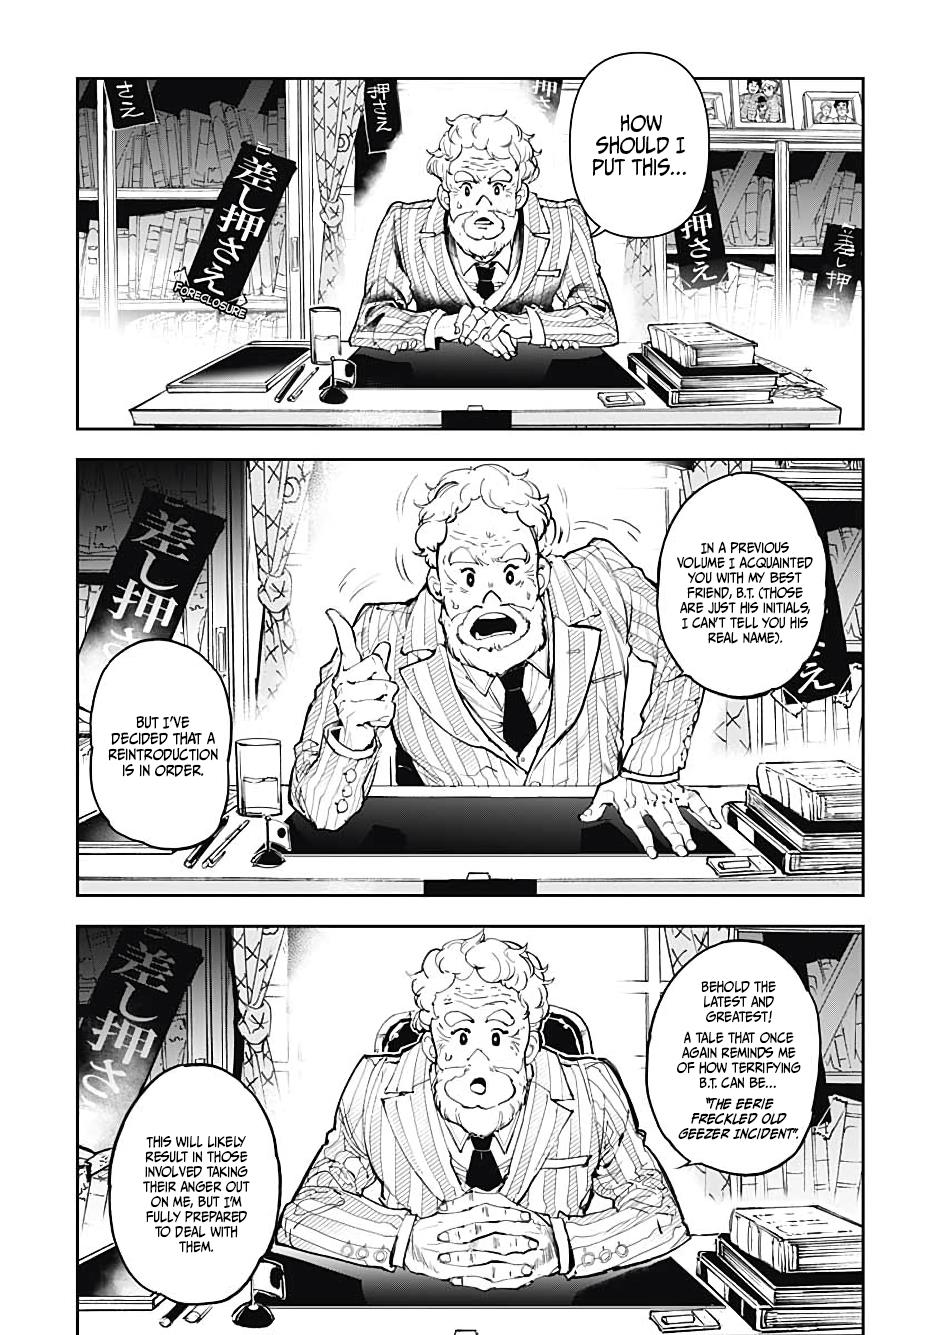 Cool Shock Old B.t. Vol.1 Chapter 1: The Eerie Freckled Old Geezer Incident - Picture 3